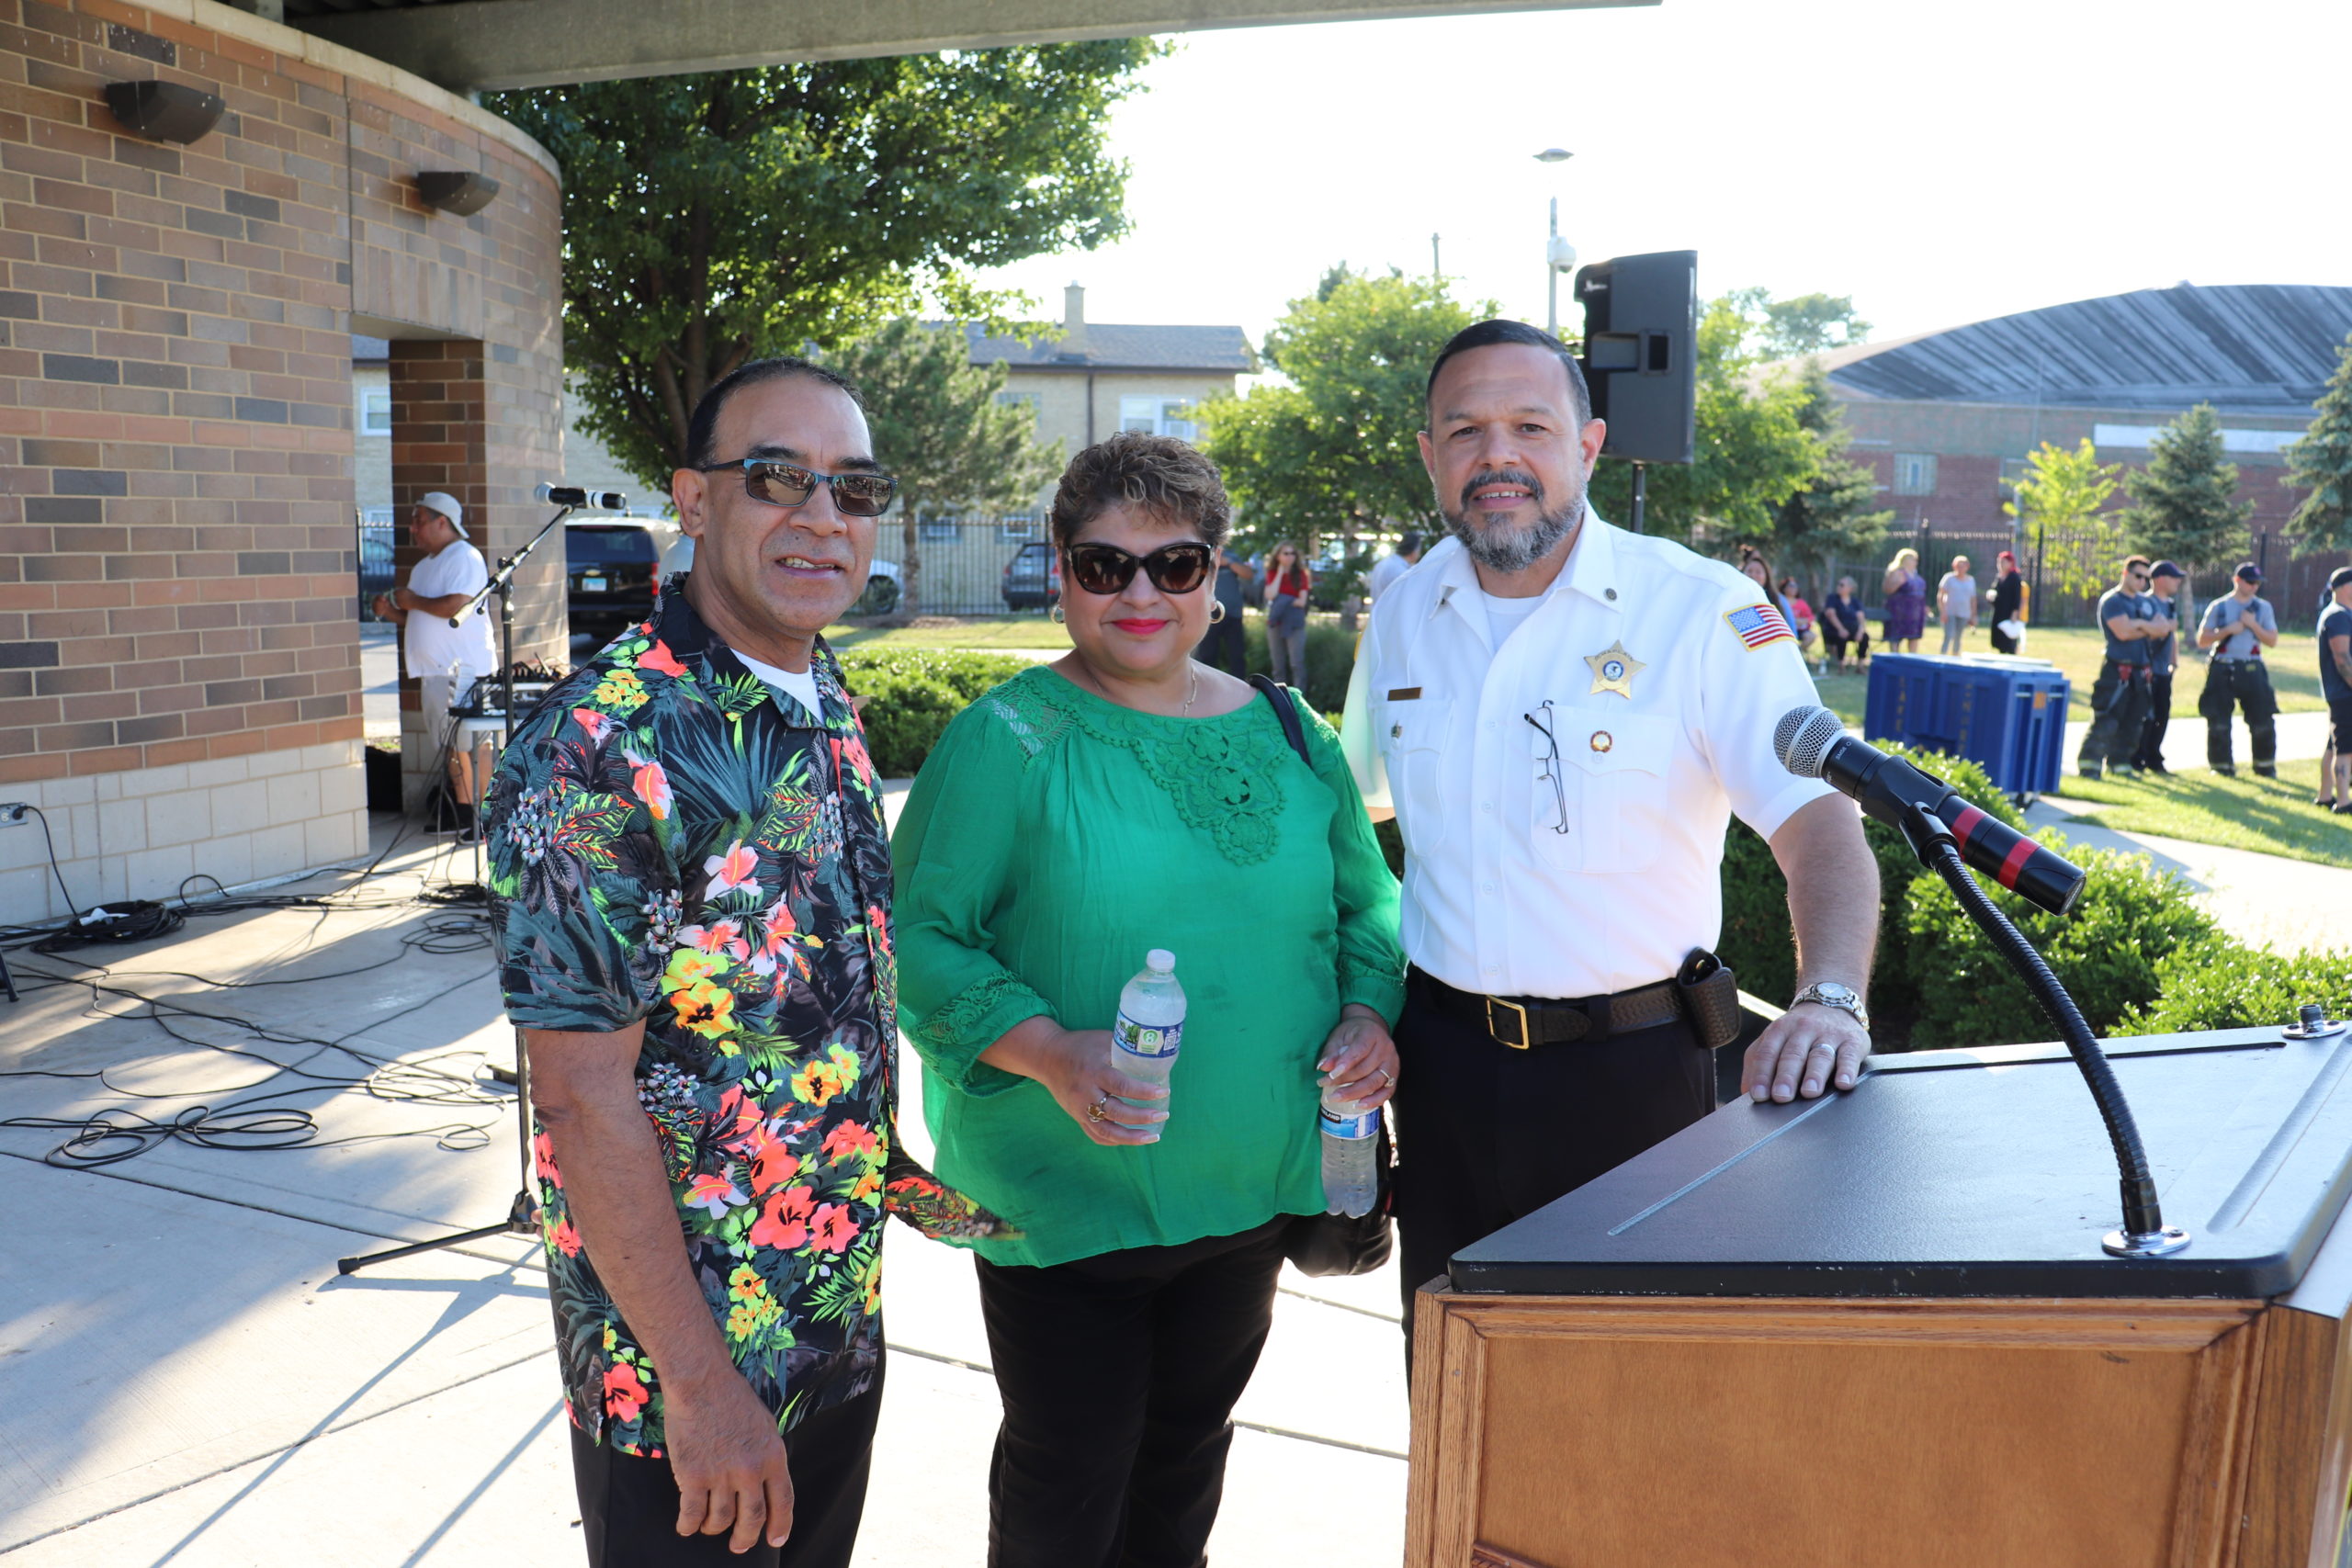 Cicero Trustee Victor Garcia and Clerk Maria Punzo-Arias pose with Cicero Chaplain Ismael Vargas at Cicero’s annual Prayer Day celebration held at Cicero Community Park on July 14, 2022